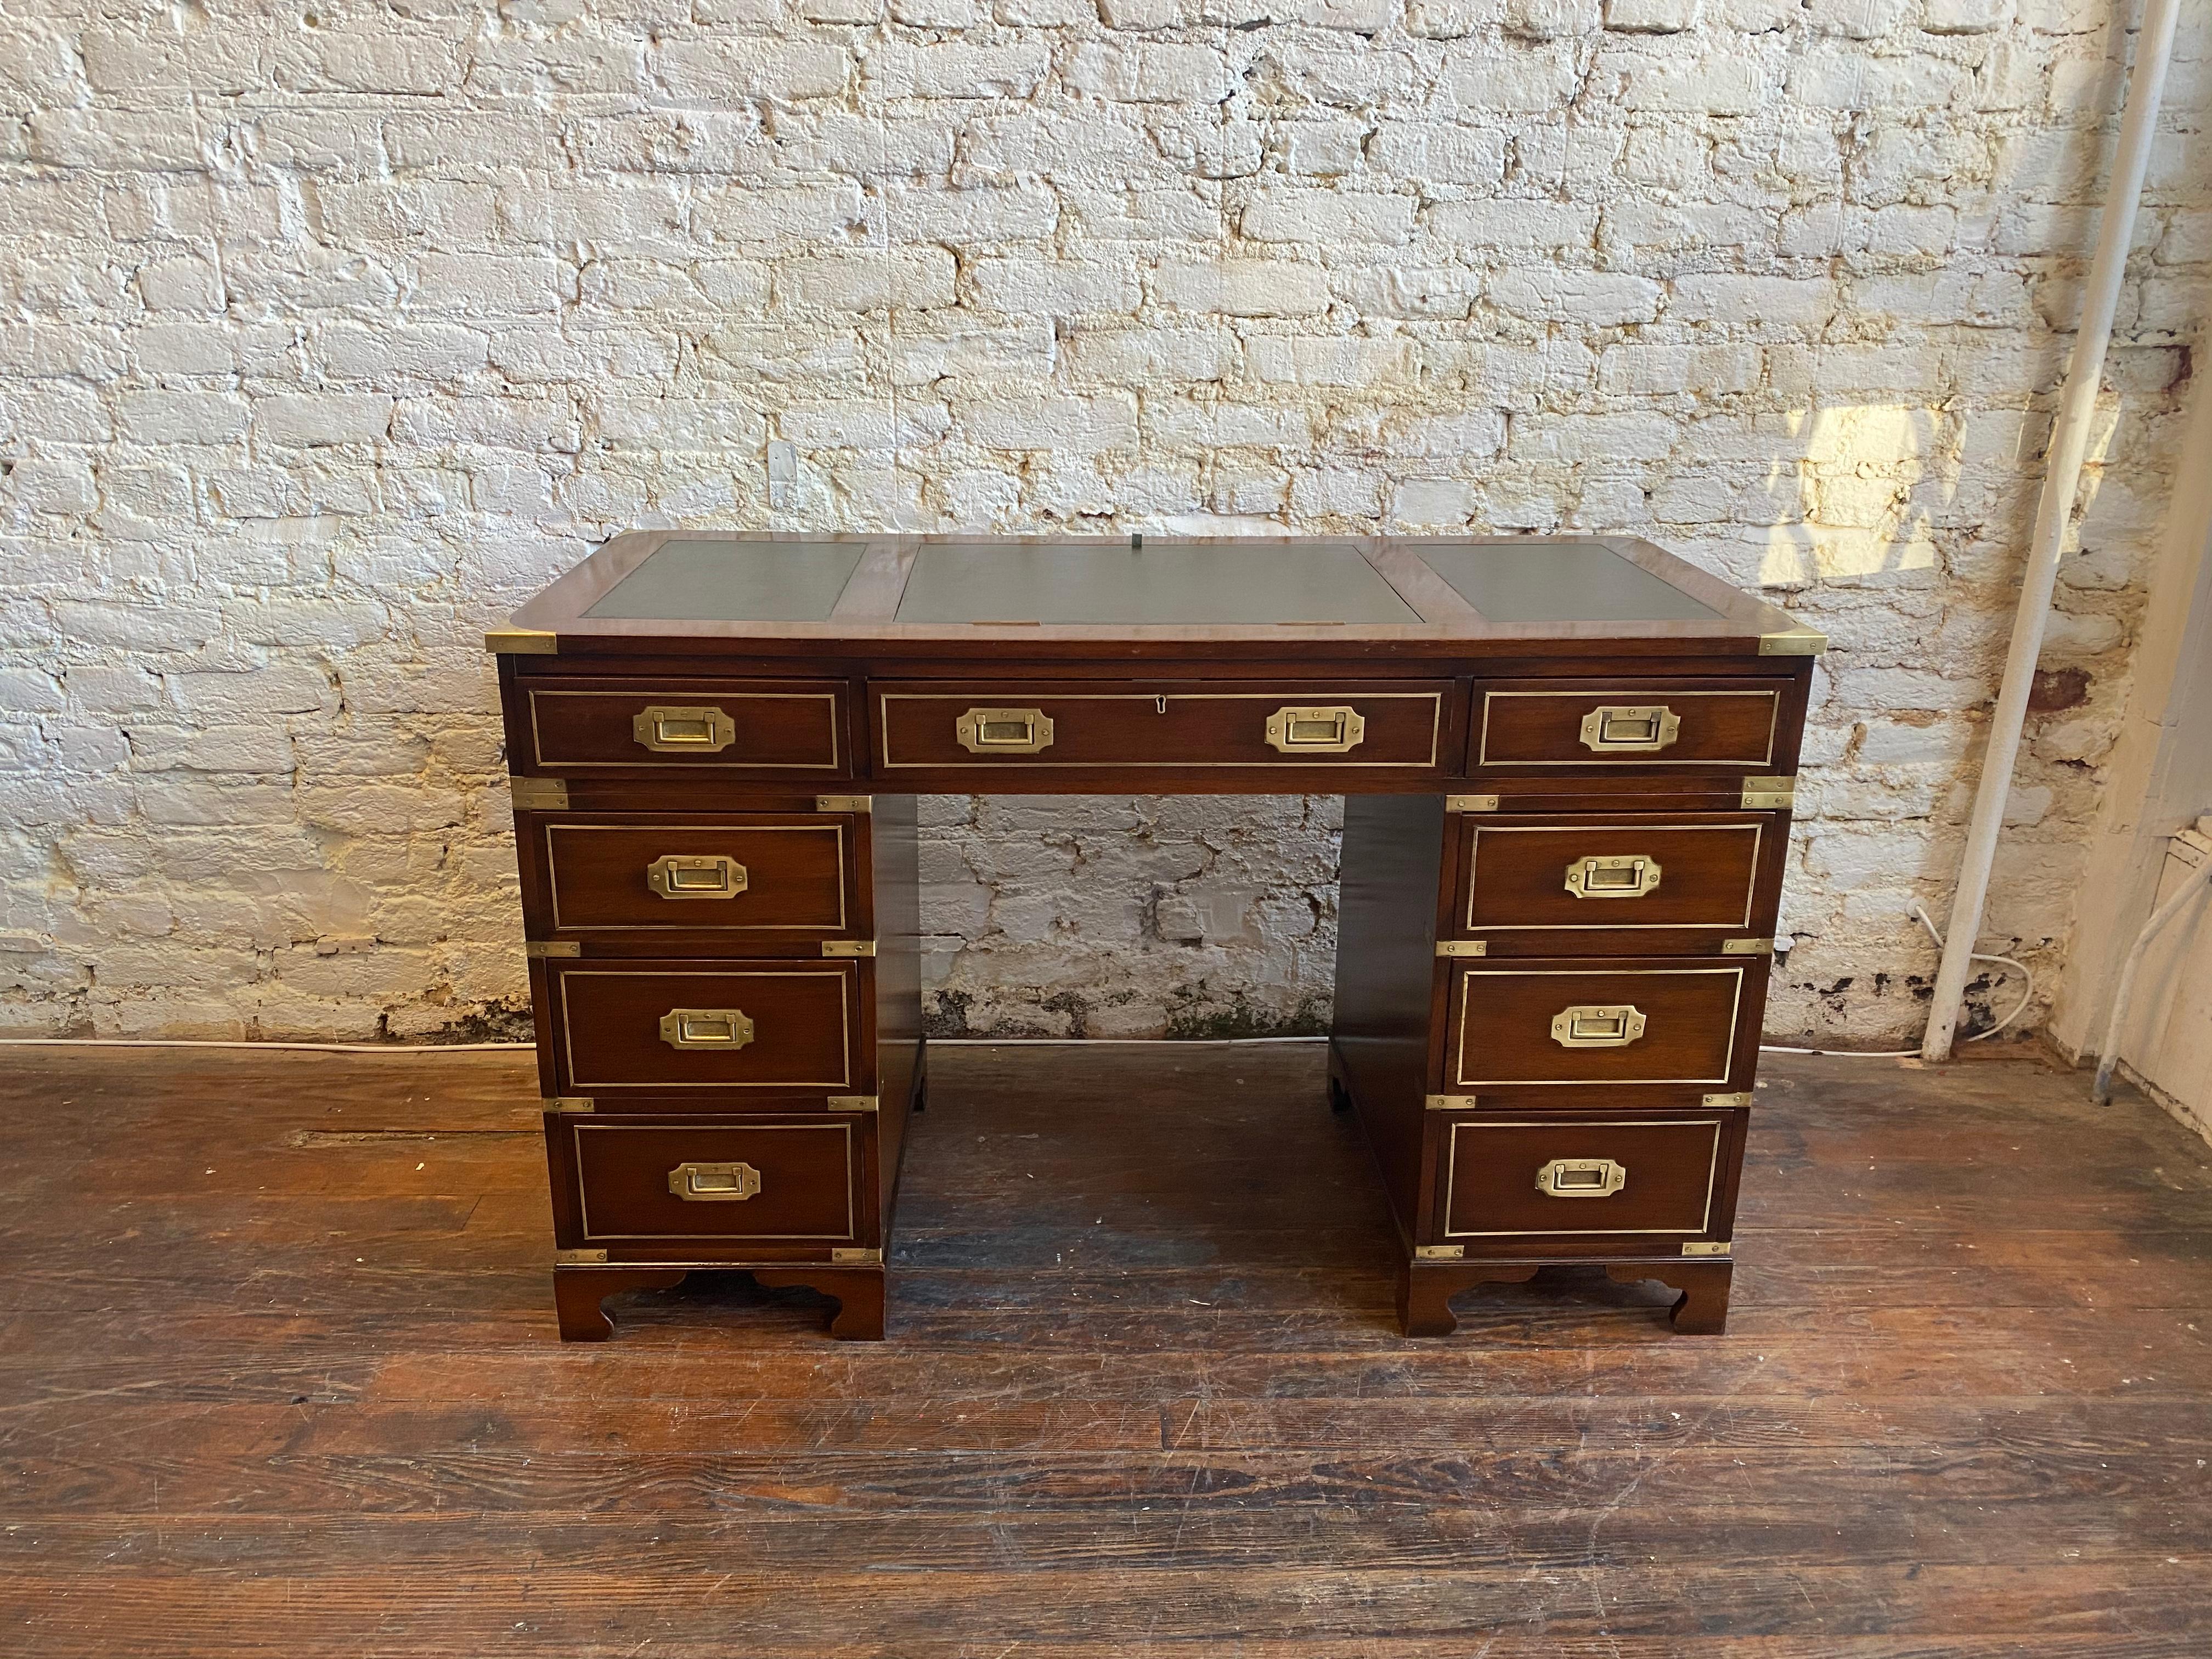 Early 20th century brass bound leather and mahogany three-part Campaign desk. Great height, color, and form. Adjustable writing slope.